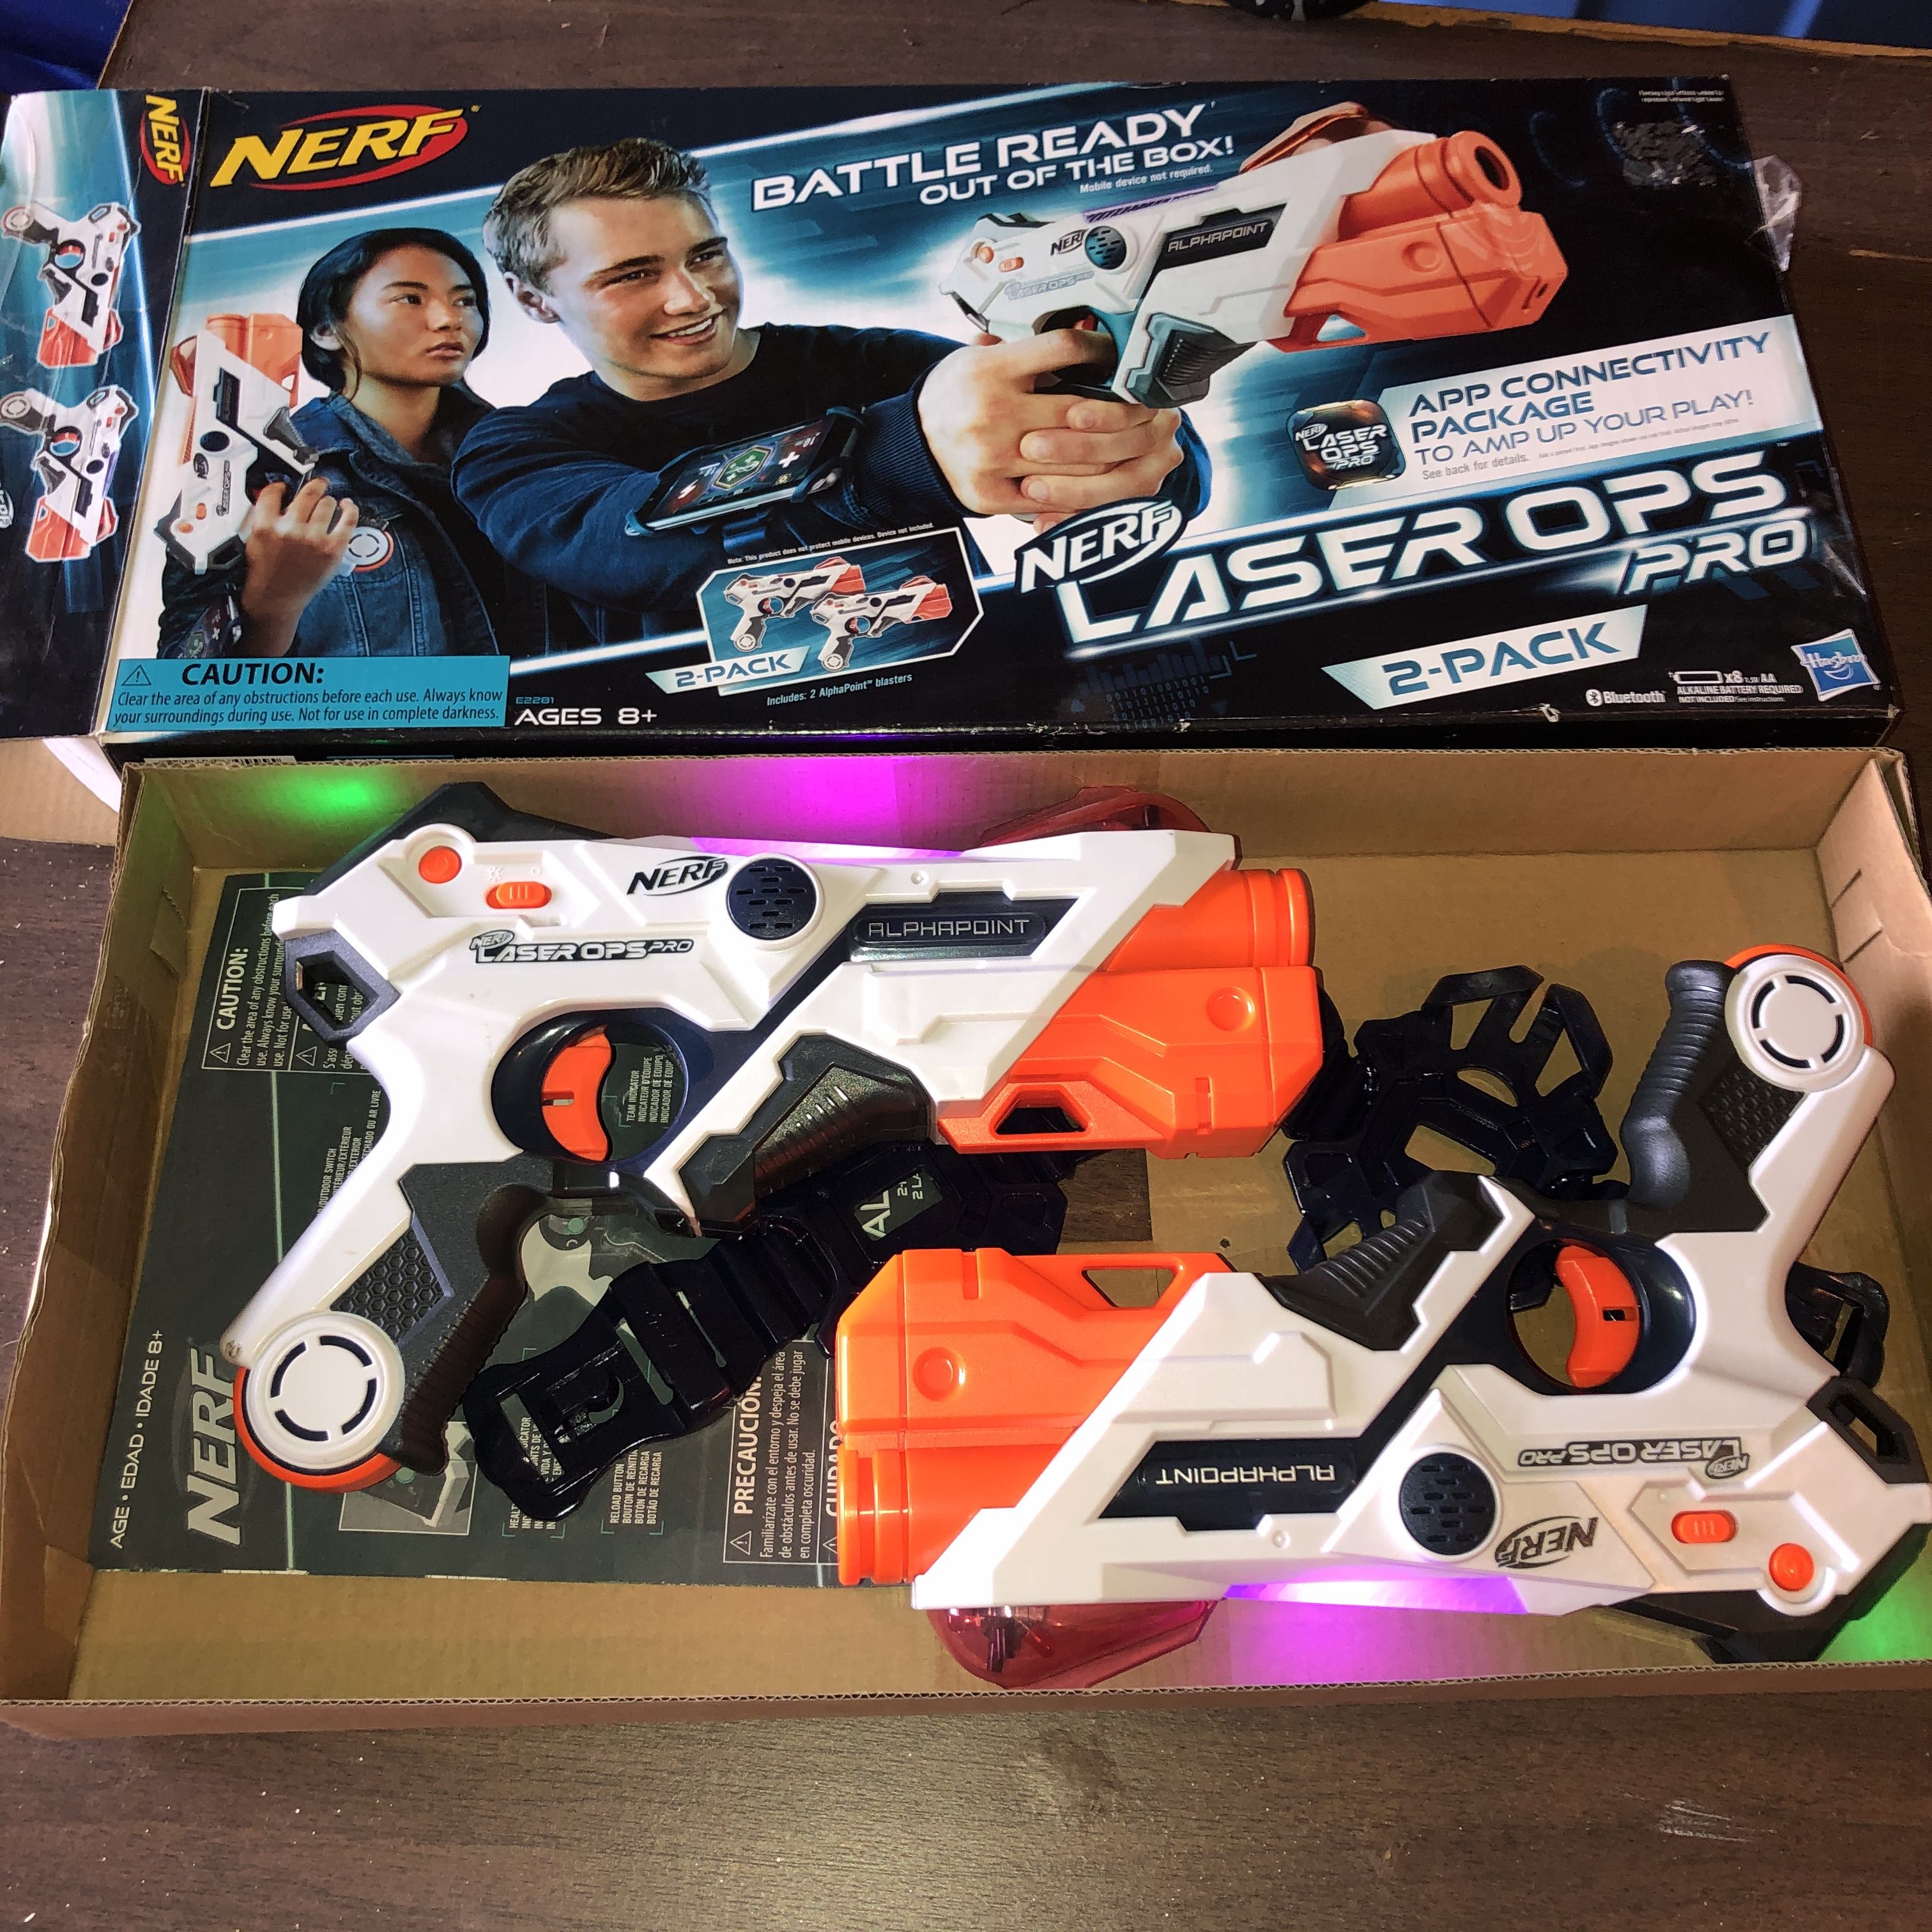 NERF Laser Ops Pro Alphapoint blasters with armbands 2 pack